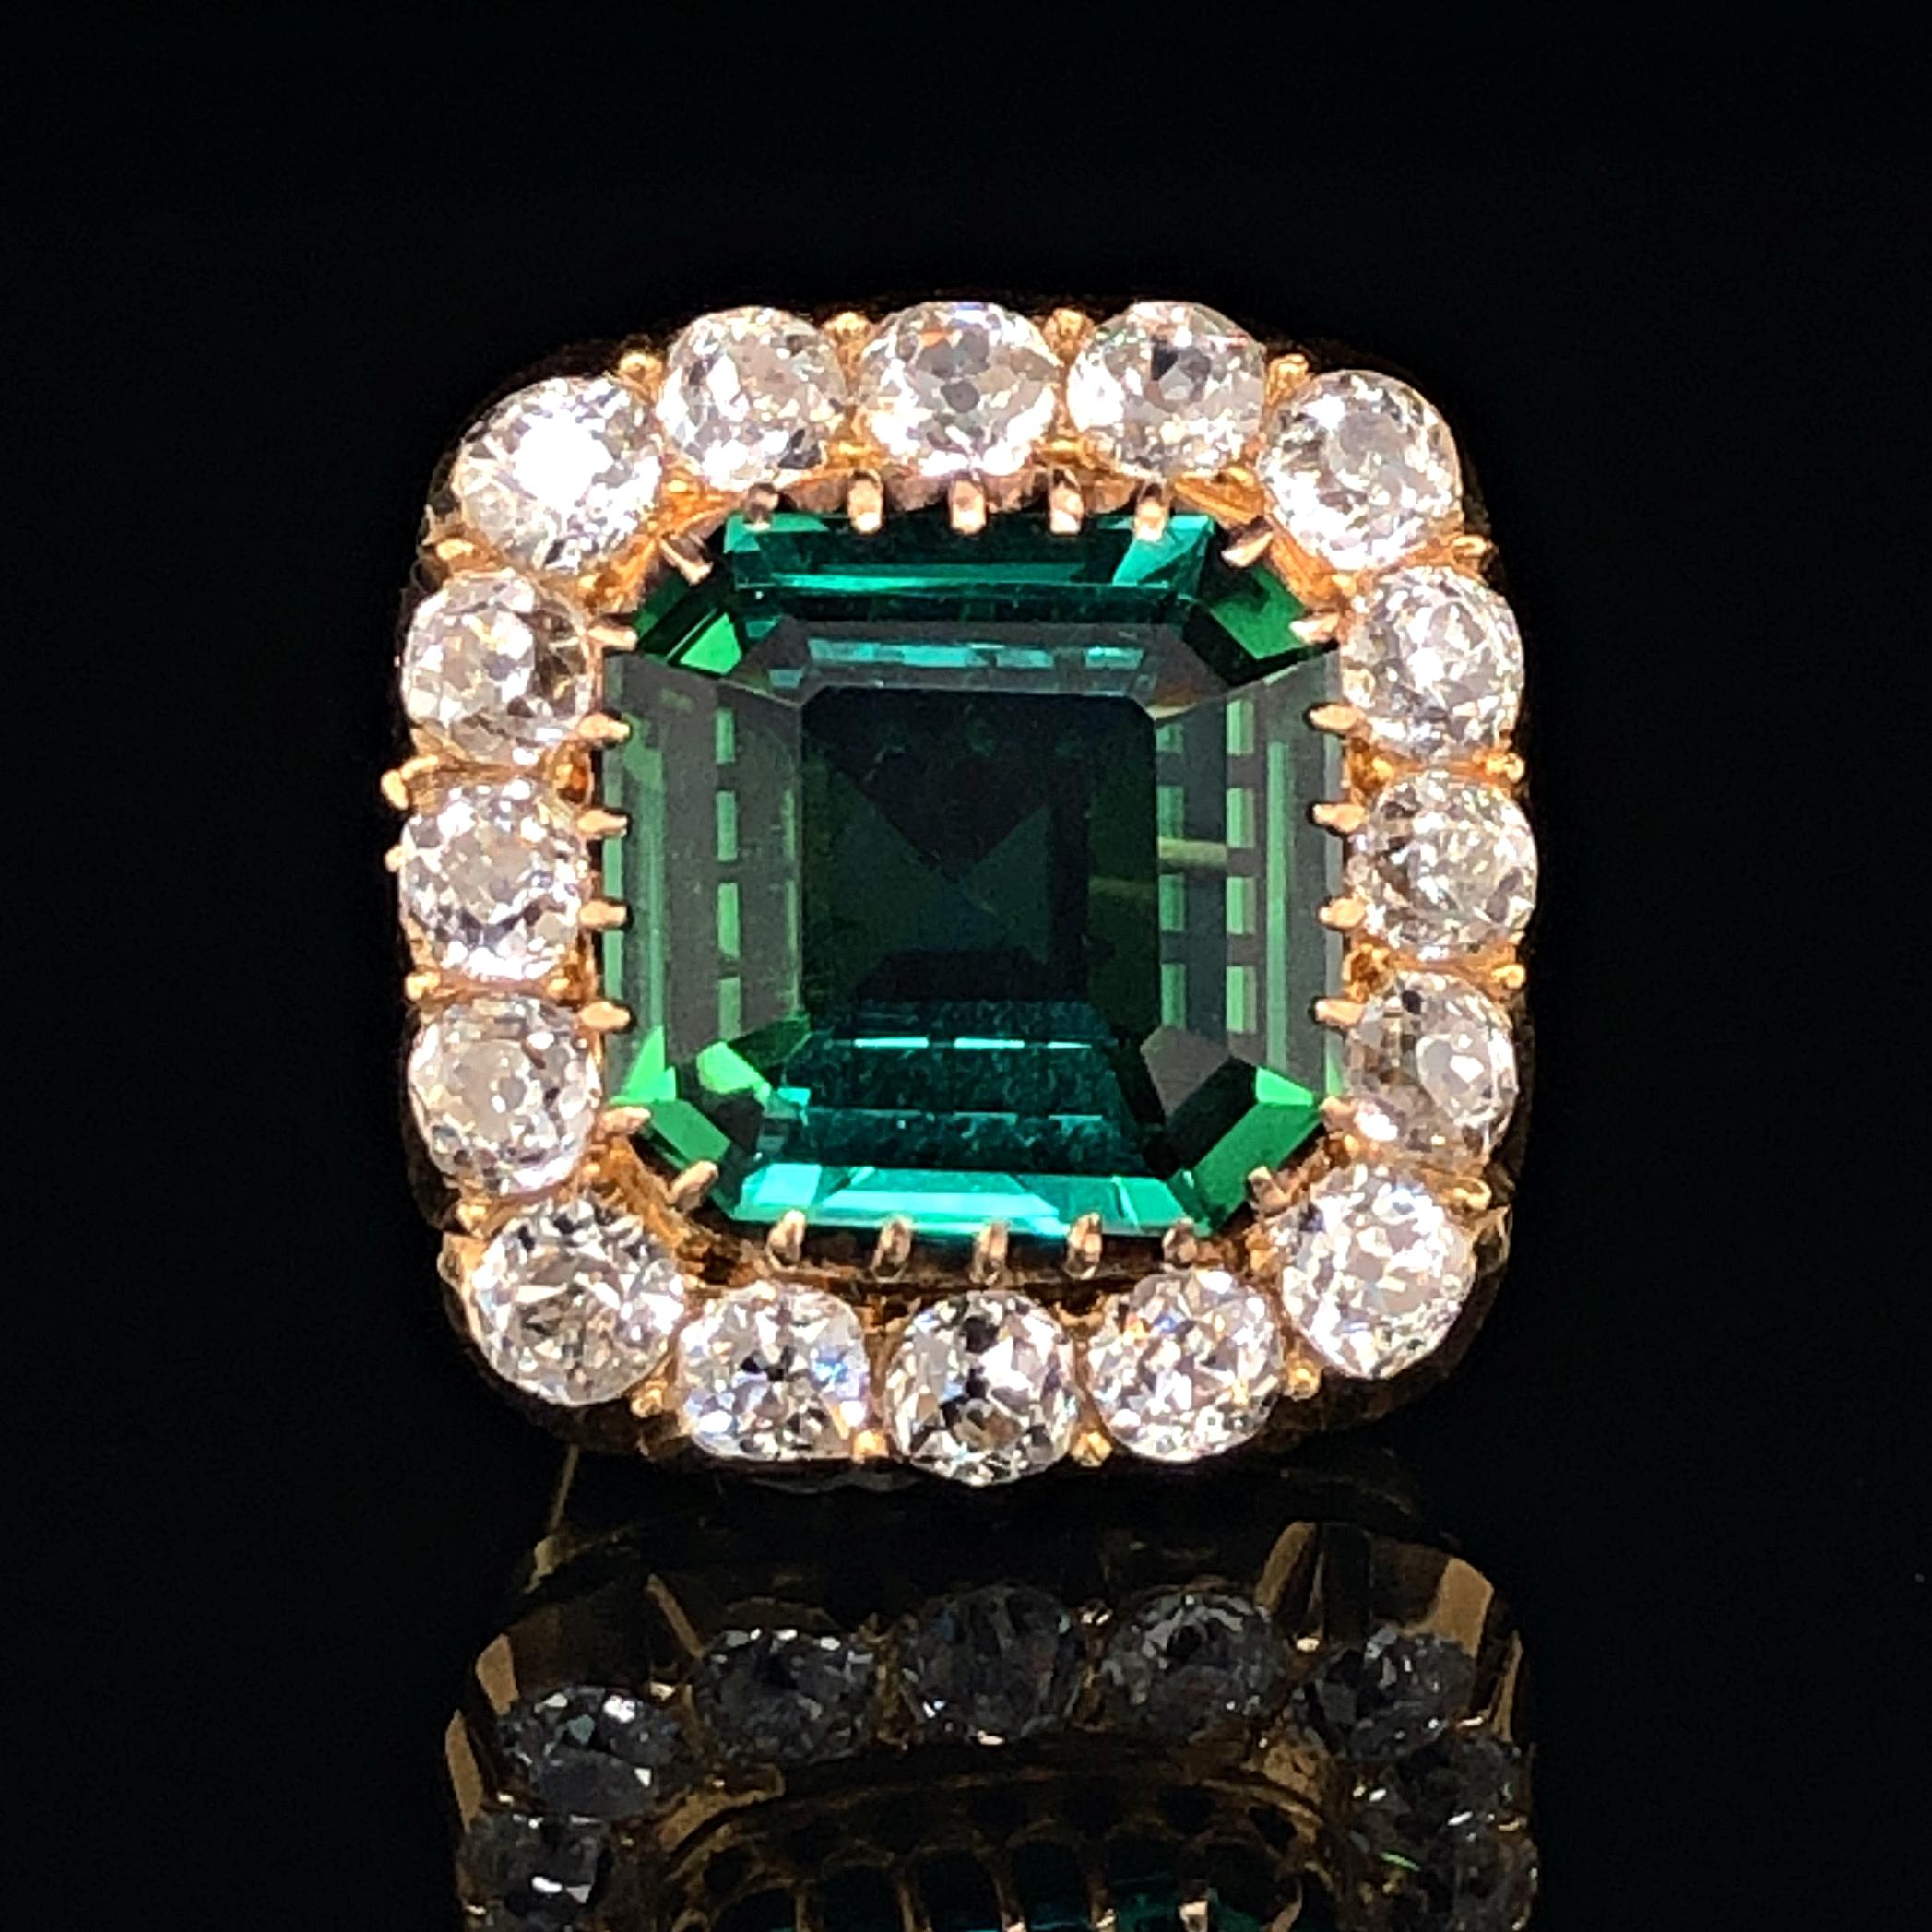 A beautiful tourmaline and diamond brooch in yellow gold, Victorian, ca. 1880s. 
The octagonal square shaped tourmaline weighs 5.15 carats and has a stunning crystal and mint blue-green colour. It is a very clean gem and free of inclusions. The